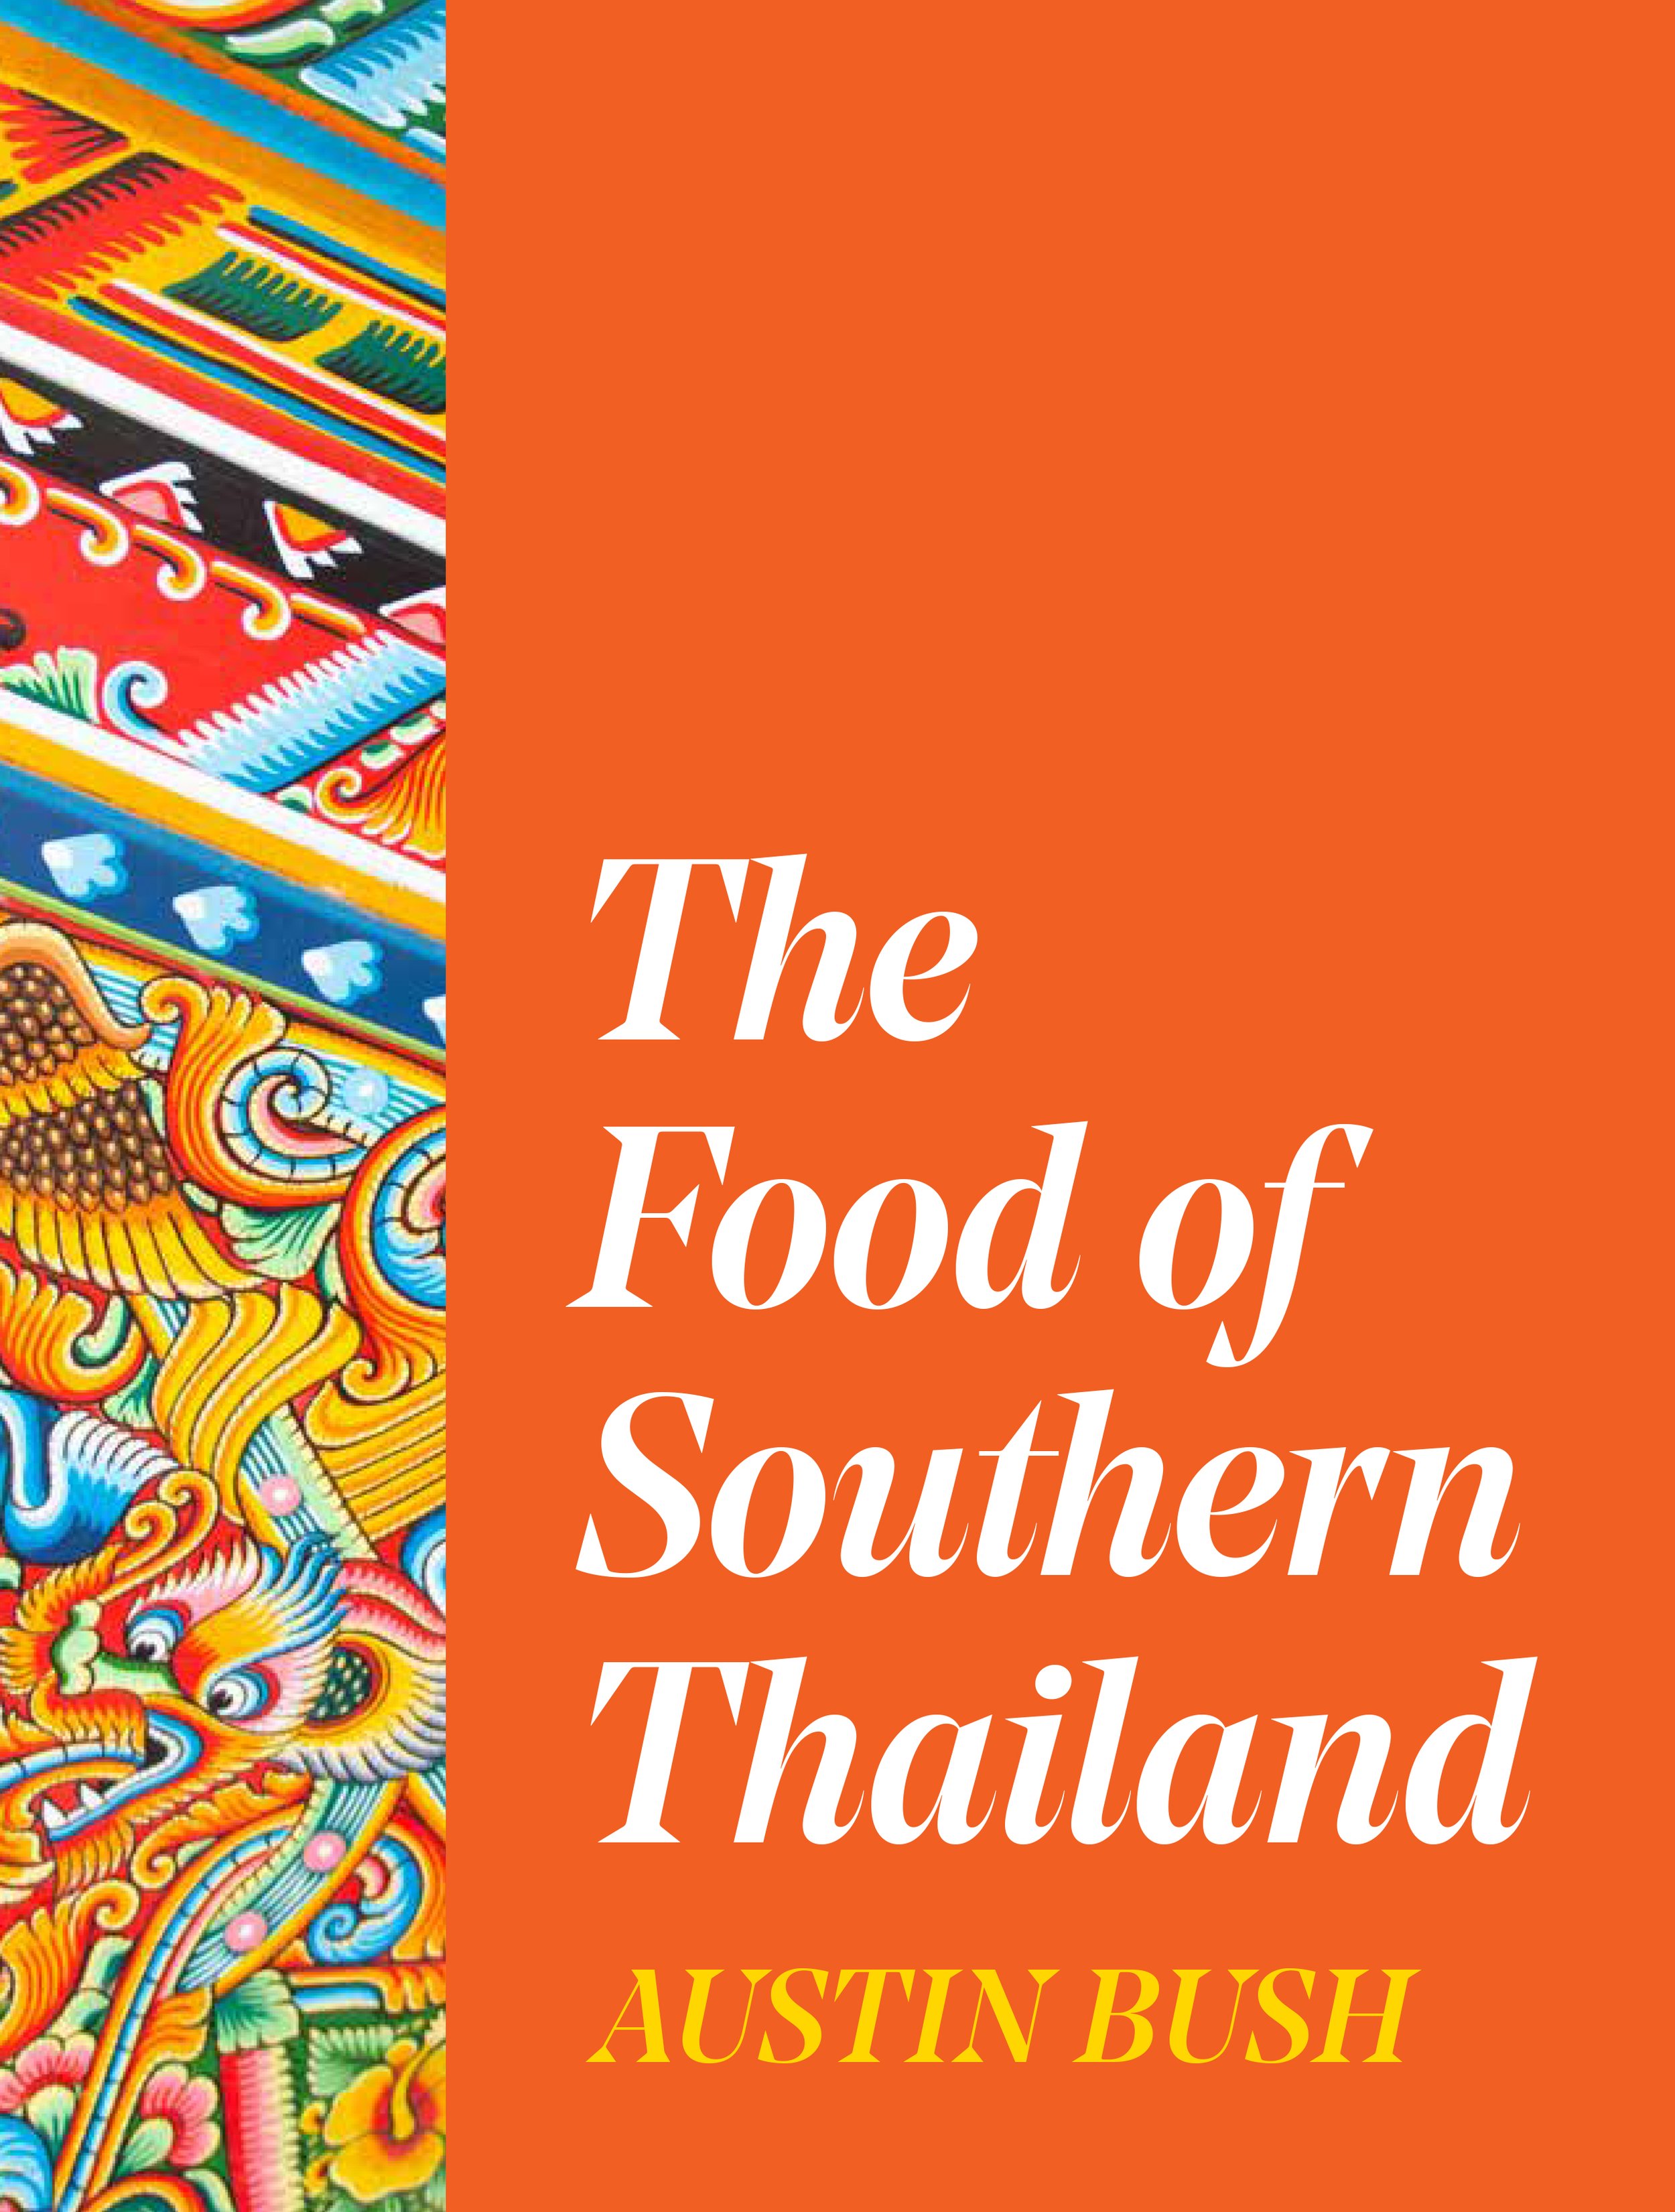    The Food of Southern Thailand   ,  published by W. W. Norton, out in October, 2023 